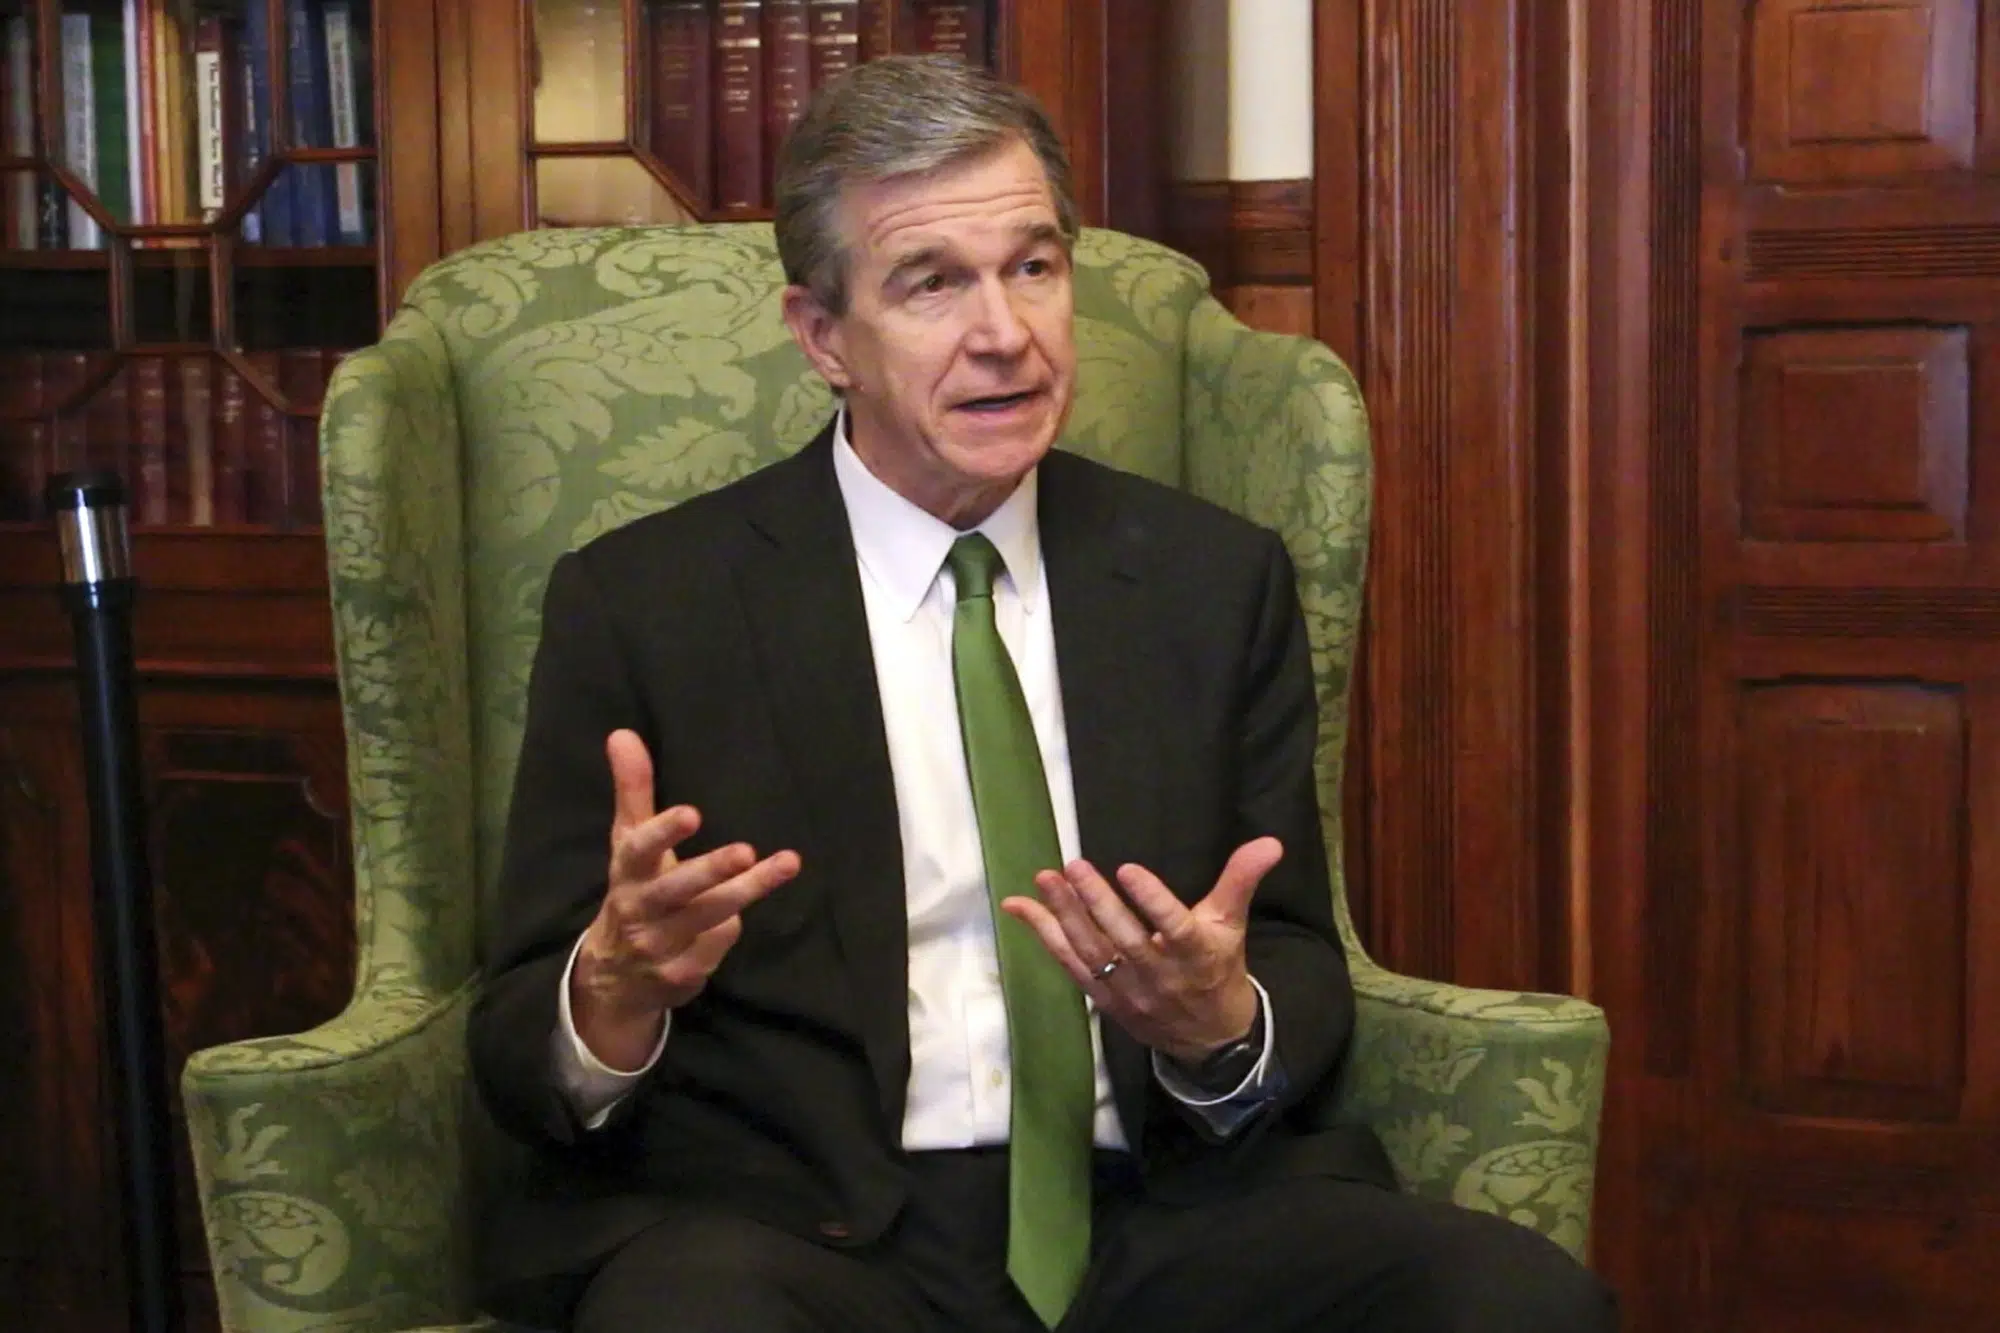 North Carolina governor vetoes limits on politics, race discussion in state workplaces